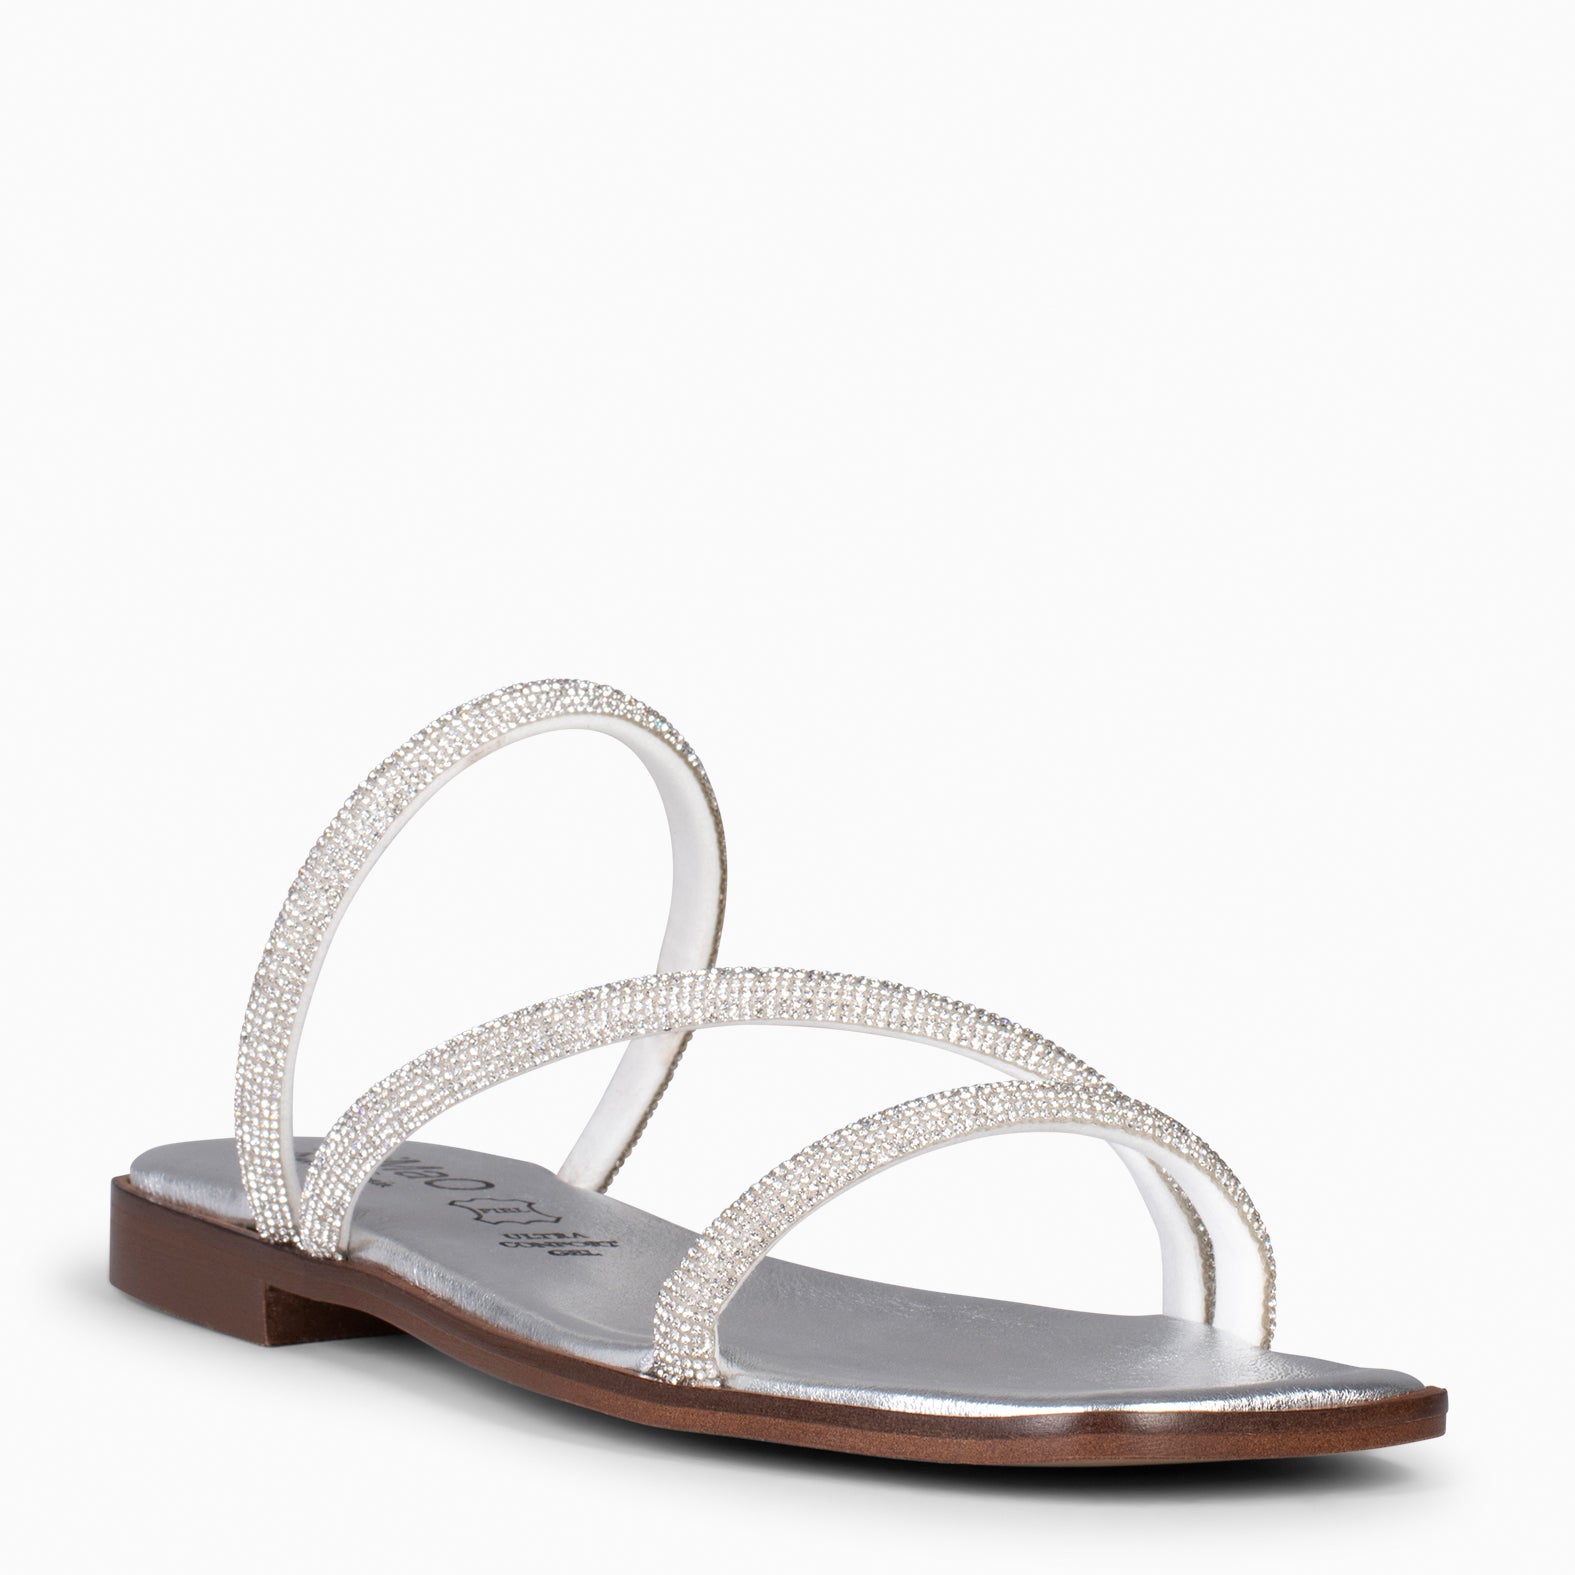 TALLIN - SILVER Flat Sandals with strass straps